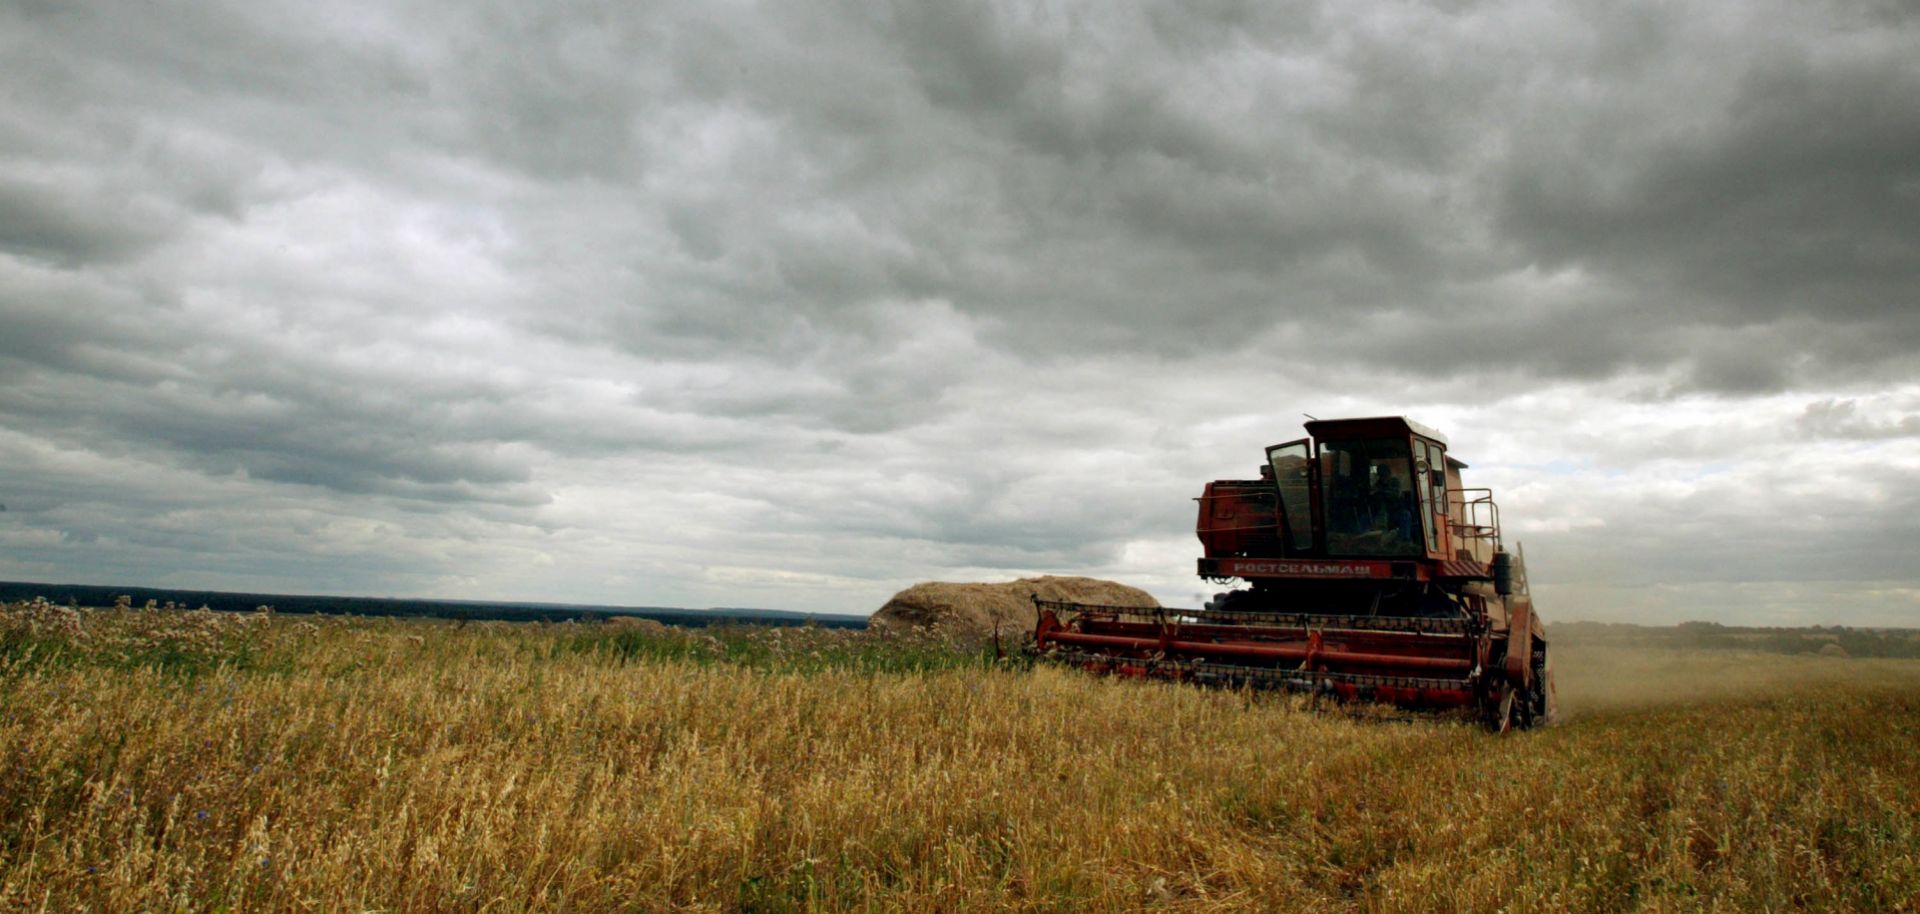 Russian agriculture, especially its wheat production, has provided its economy with trade revenue that goes beyond its reliance on mineral exports.